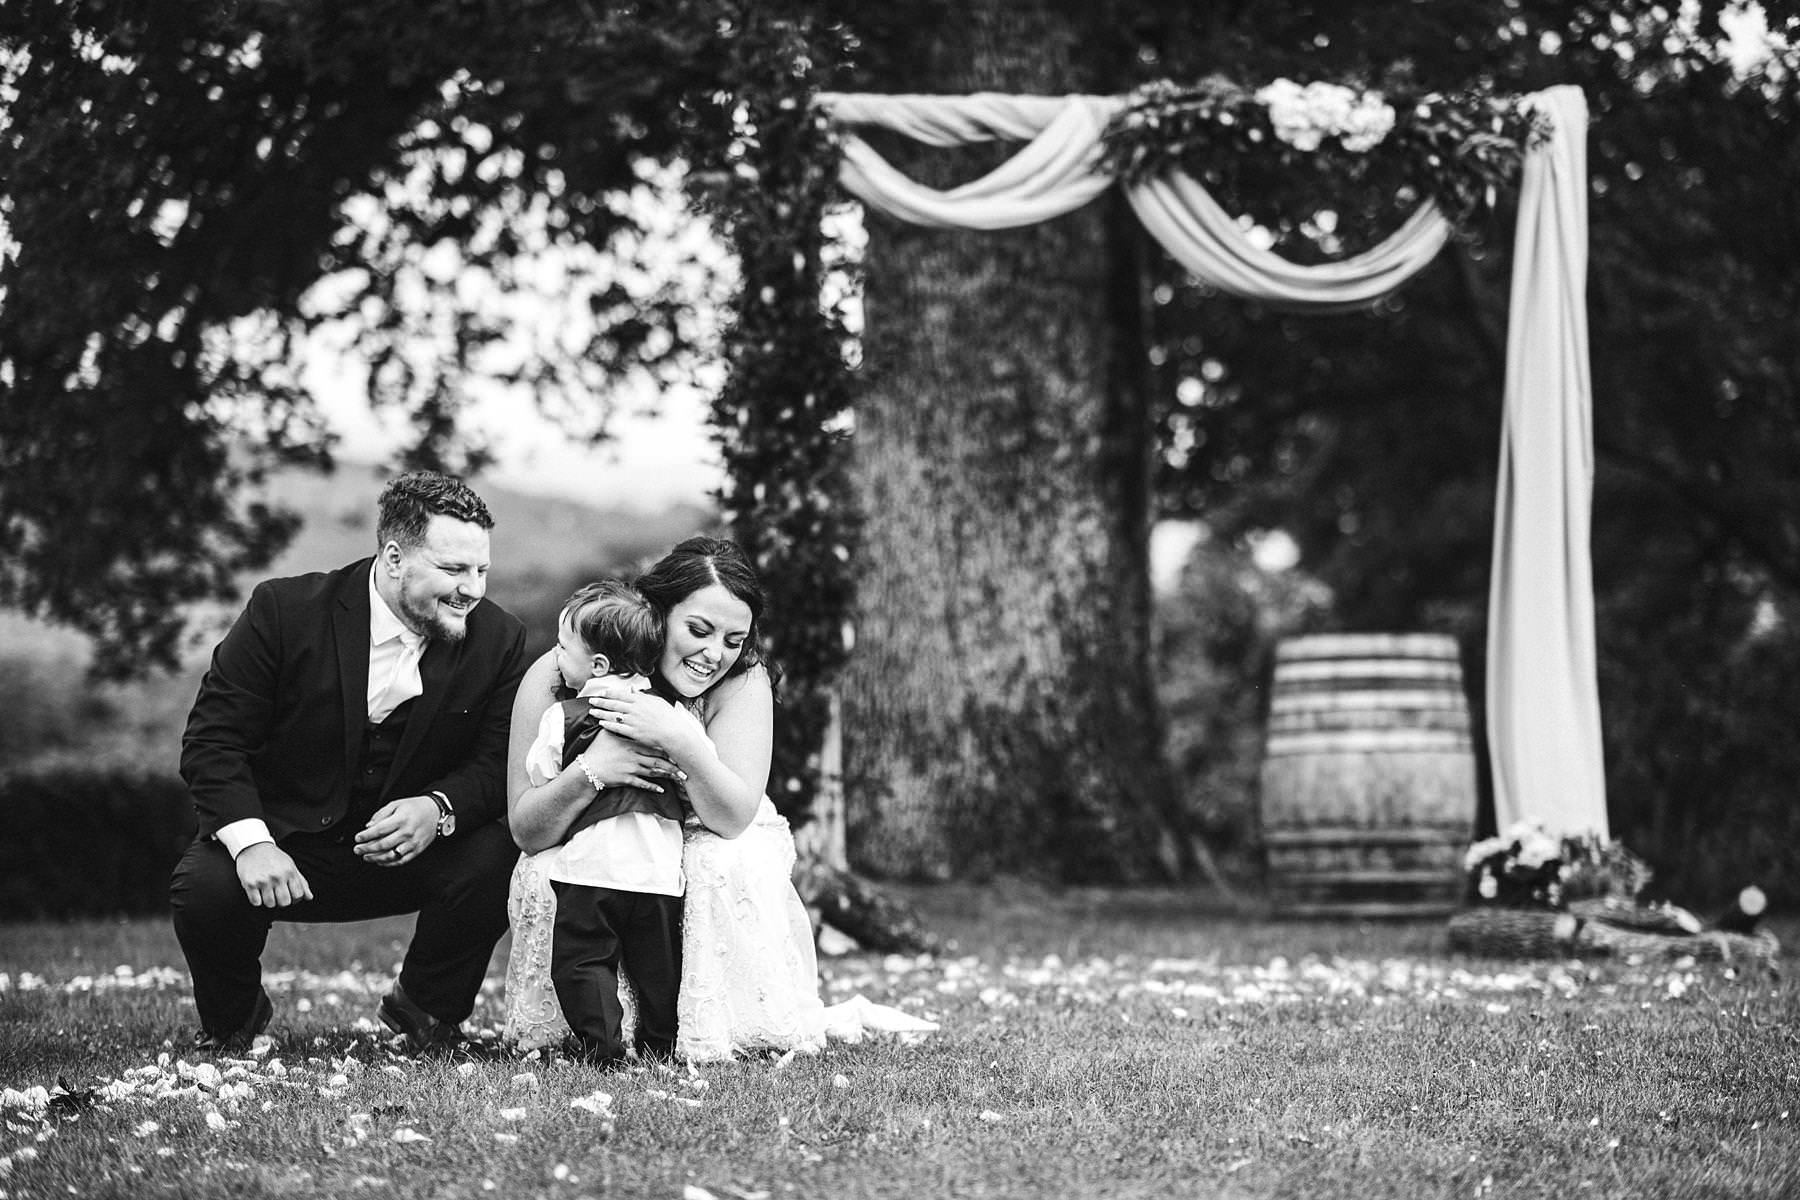 Lovely candid family shoot during destination wedding in Tuscany countryside Villa Le Bolli near Radicondoli medieval town